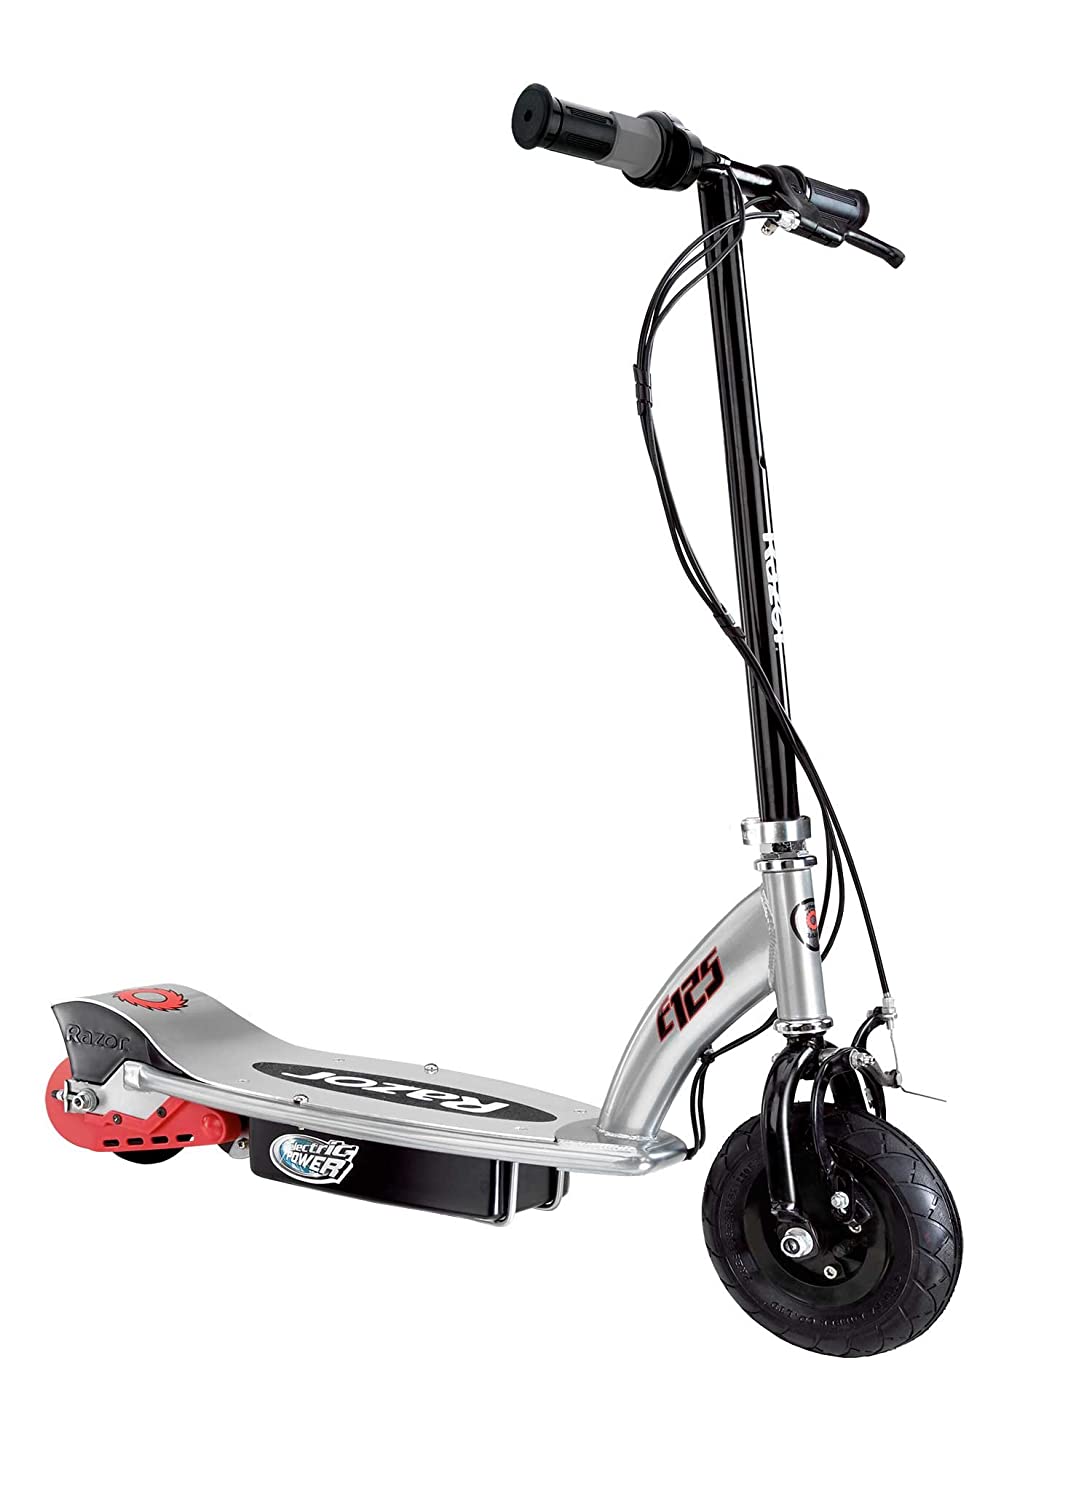 Top 10 Best Electric Scooters For Kids & Reviews in 2023 1